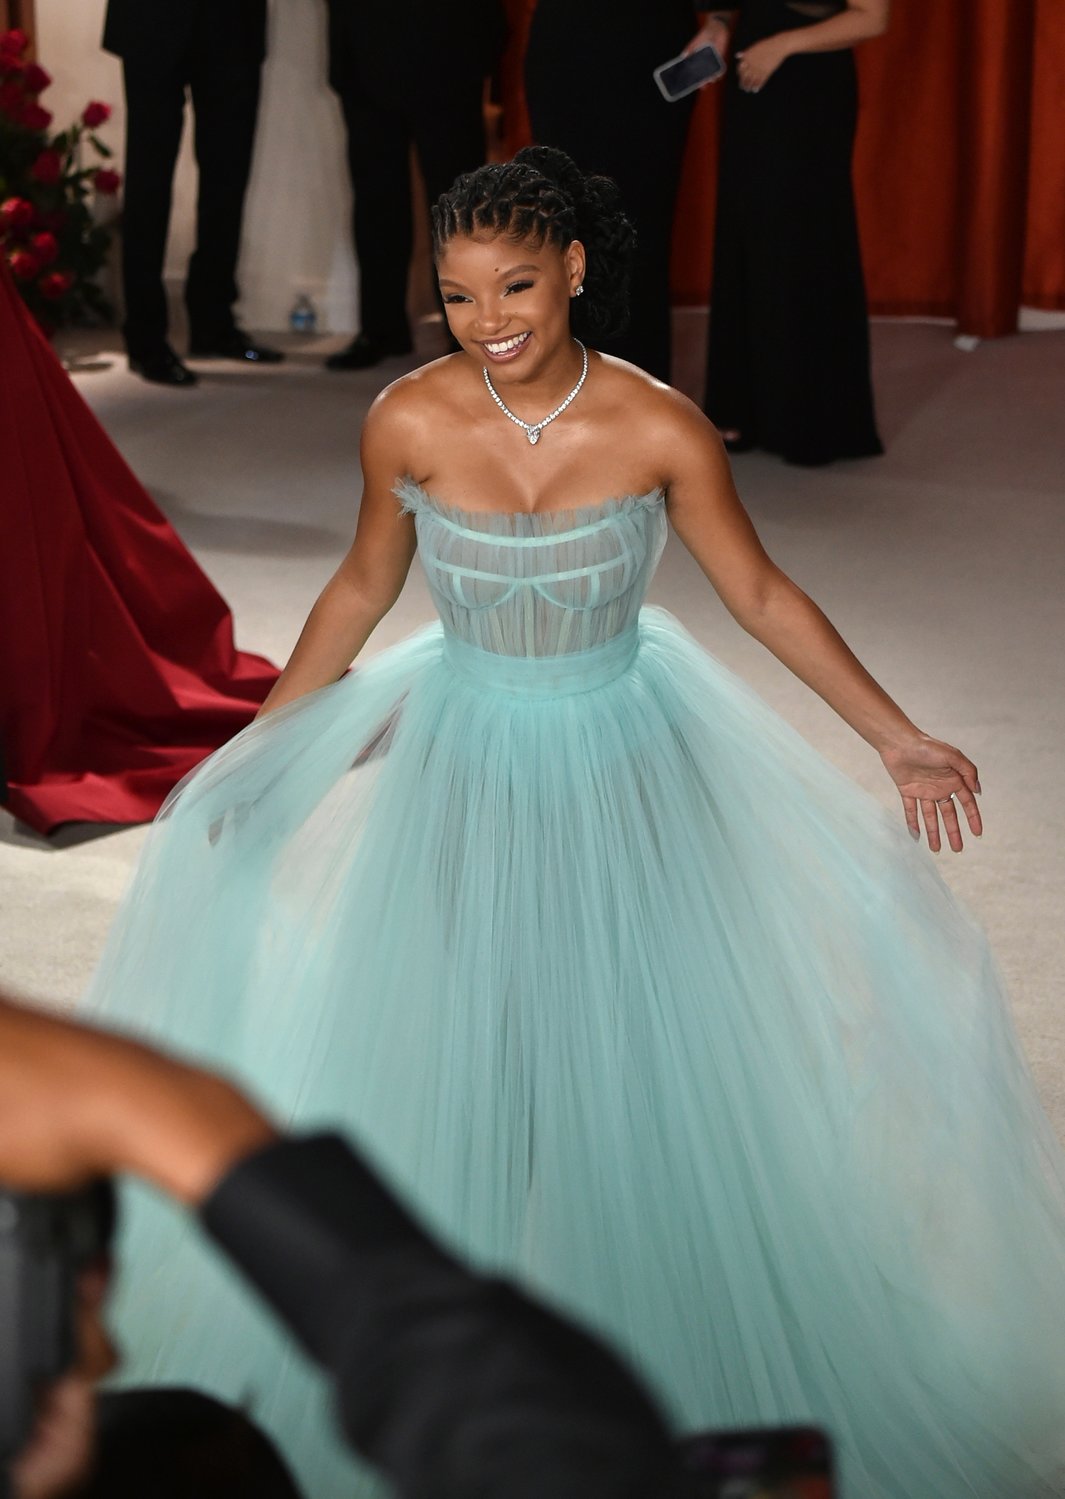 Halle Bailey arrives at the Oscars on Sunday, March 12, 2023, at the Dolby Theatre in Los Angeles. (Photo by Richard Shotwell/Invision/AP)